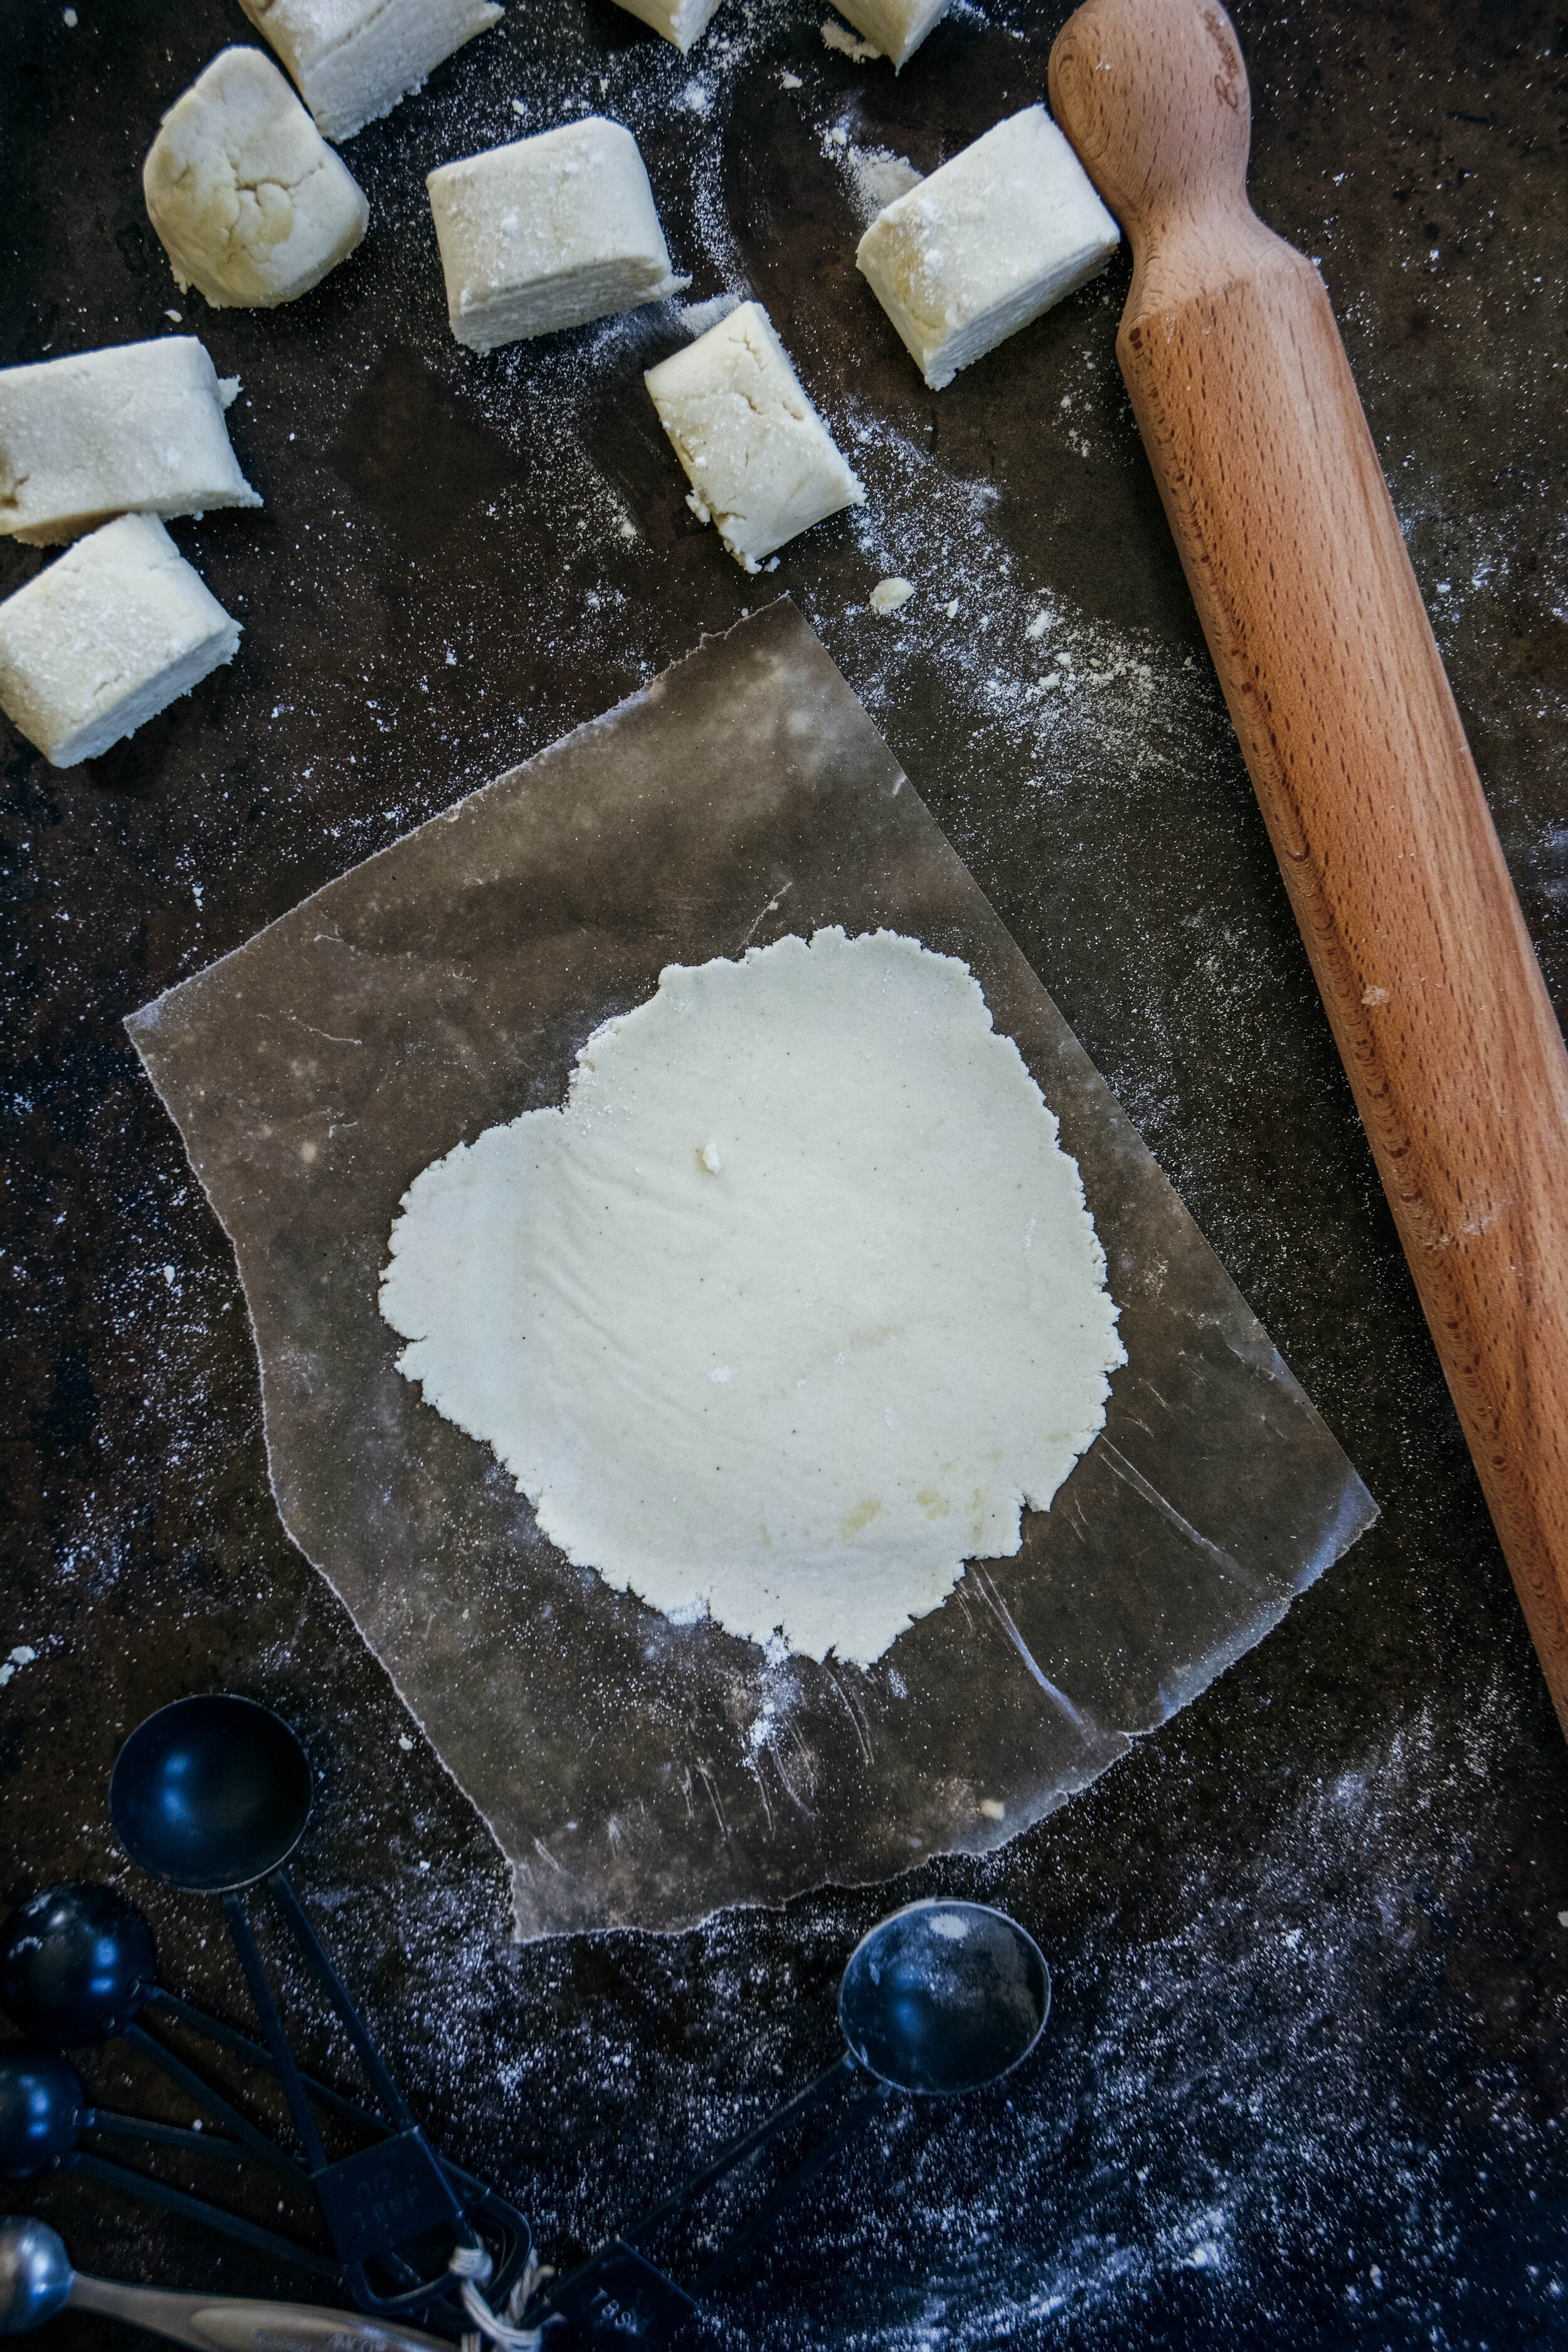  Making paleo tortillas is incredibly easy and fun! All you need is cassava flour, coconut flour, water, apple cider vinegar, olive oil and salt. And no tortilla maker needed! A little wax paper will do the trick. So check out this 6 ingredient paleo tortilla recipe. #cassava #cassavatortillas #paleotortillas #paleo #whole30tortillas #calmeats #vegantortillas #vegantacos #paleotacos #tortillas #tortillarecipe #whole30 #vegan 